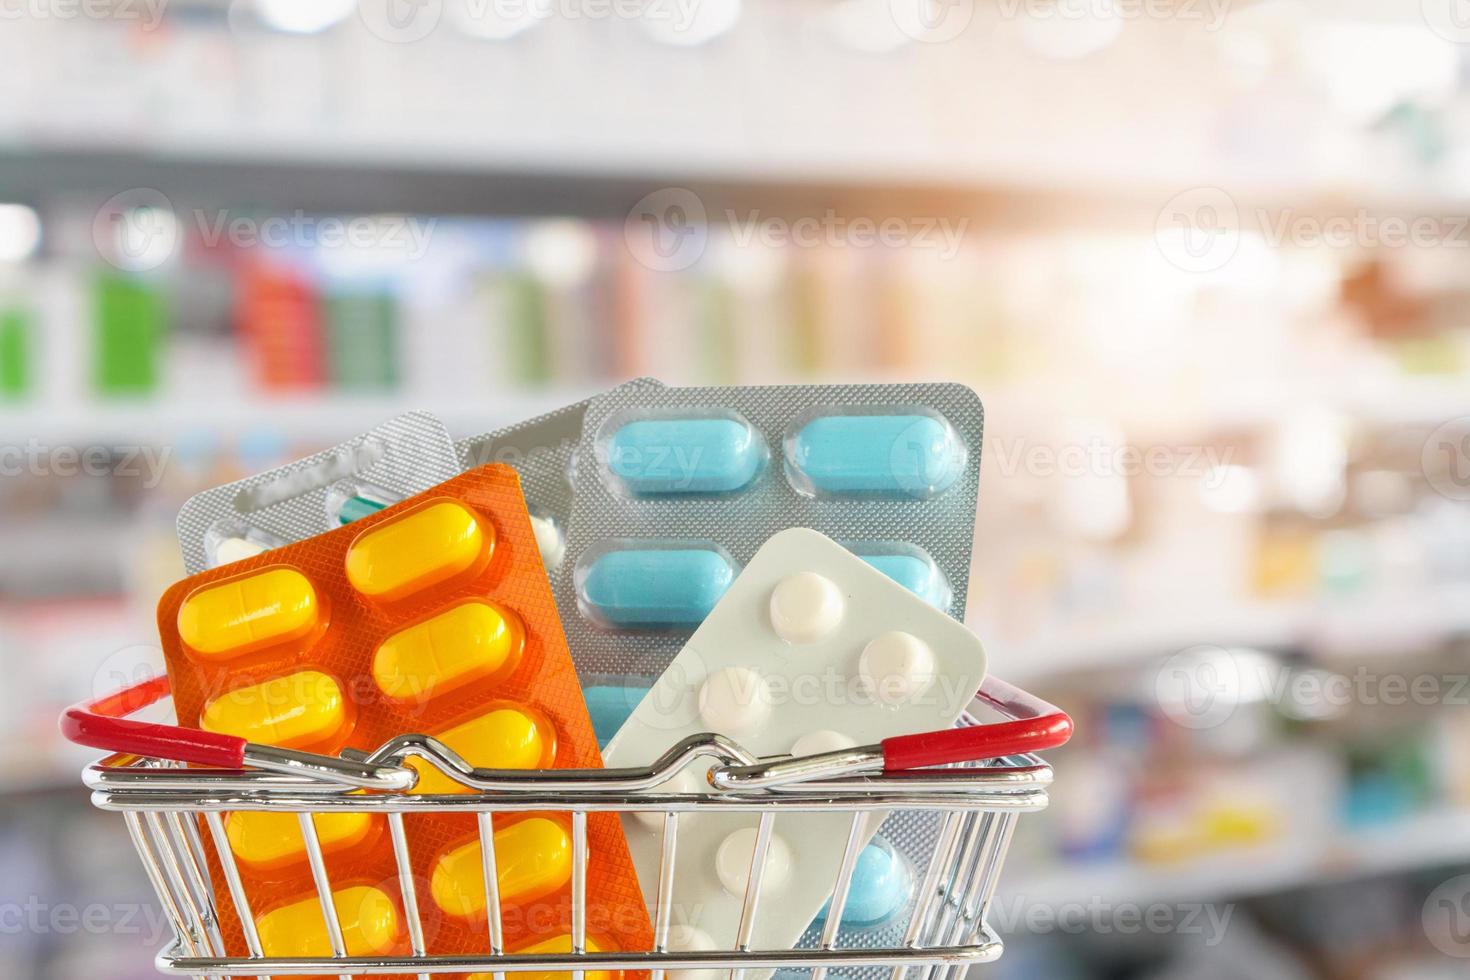 Medicine pill tablet in shopping basket with pharmacy drugstore shelves blurred background photo